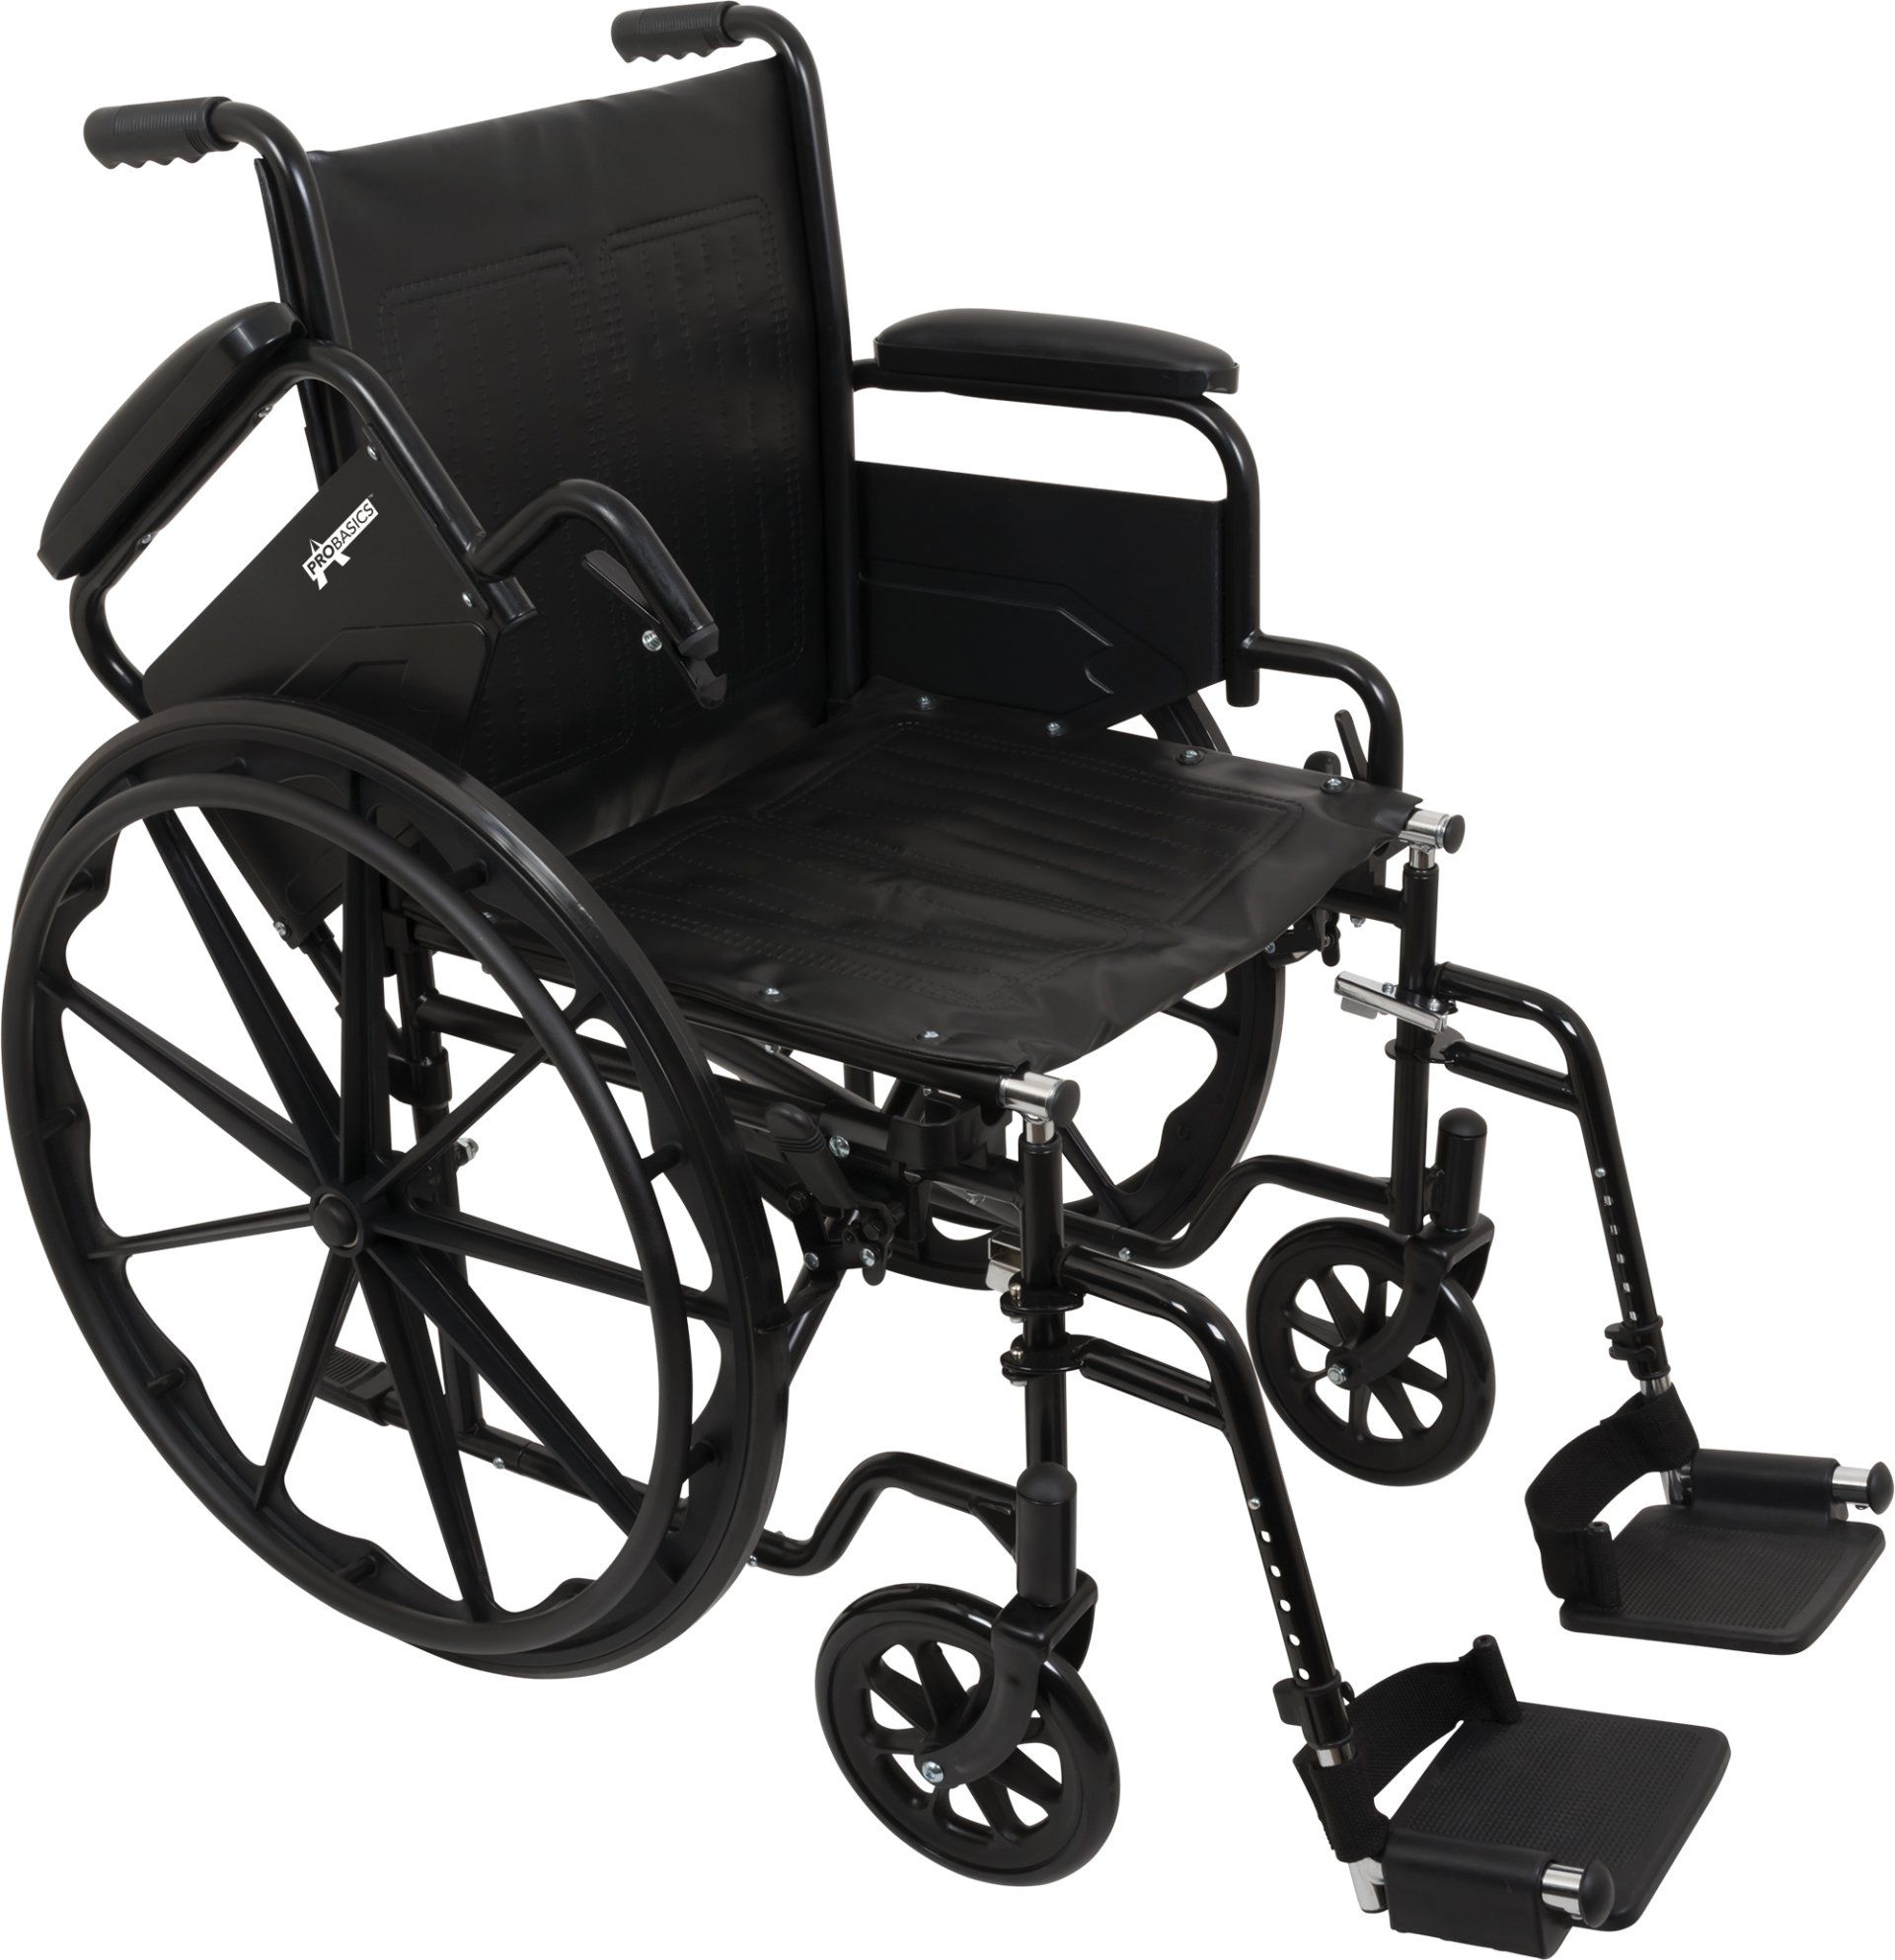 K1 lightweight wheelchair, flip back removable padded armrests, easy-to-clean vinyl upholstery, chart pocket and heel loops on front foot rests.